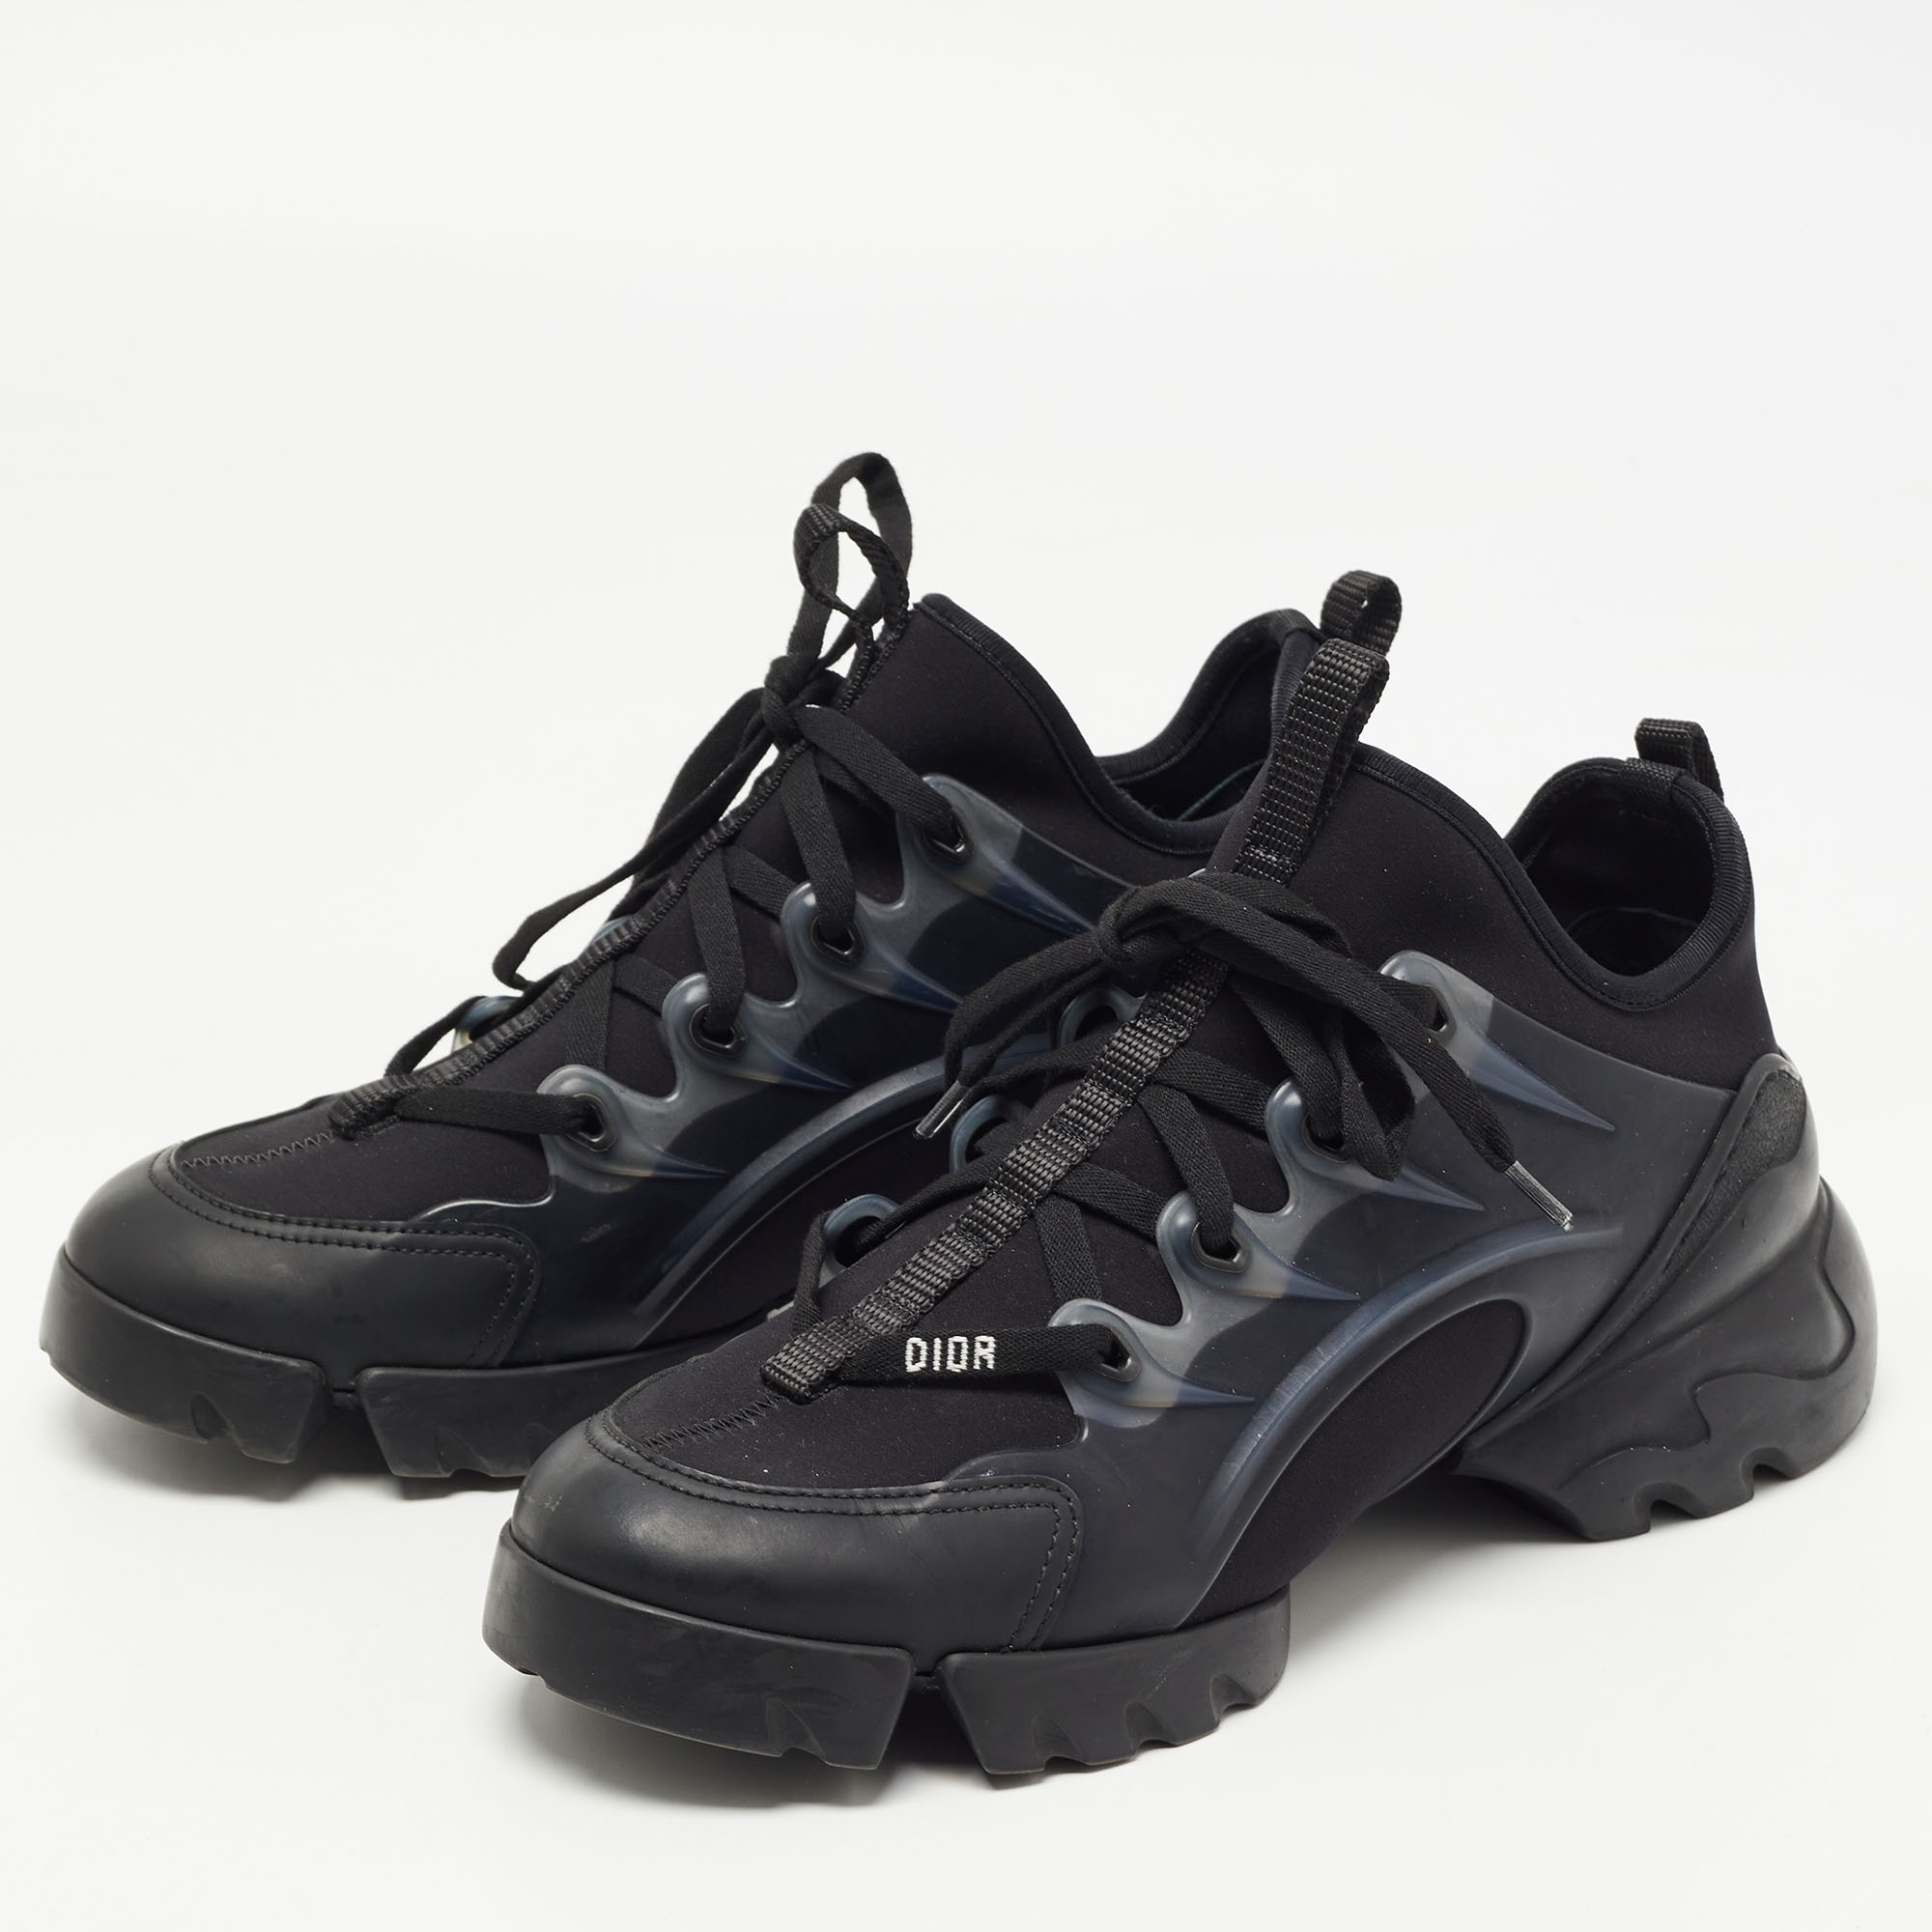 

Dior Black Neoprene and Leather D-Connect Sneakers Size